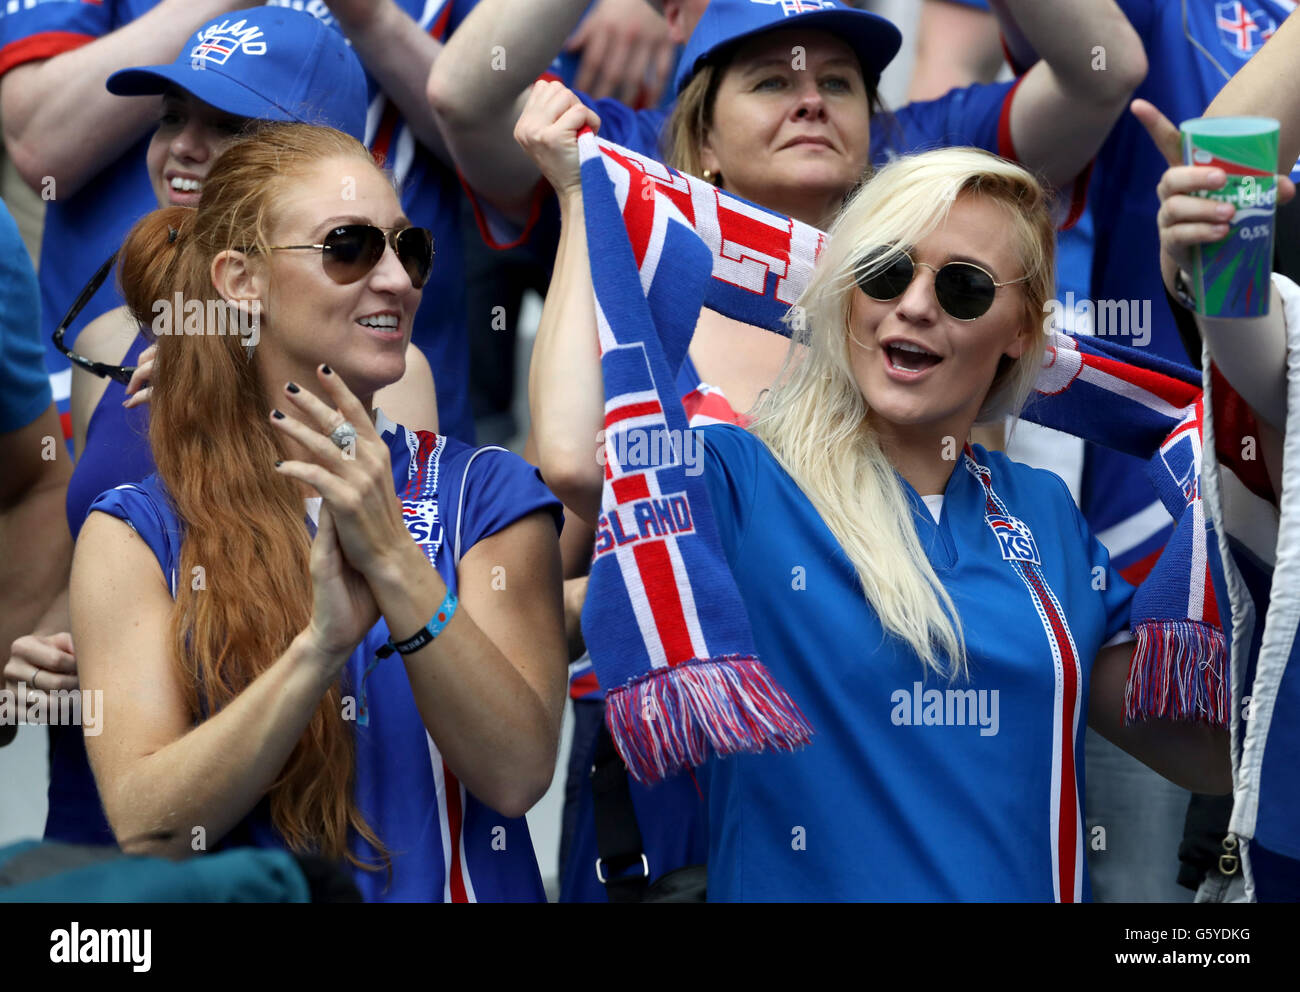 Iceland fans cheer on their side in the stands before the Euro 2016, Group F match at the Stade de France, Paris. PRESS ASSOCIATION Photo. Picture date: Wednesday June 22, 2016. See PA story SOCCER Iceland. Photo credit should read: Owen Humphreys/PA Wire. RESTRICTIONS: Use subject to restrictions. Editorial use only. Book and magazine sales permitted providing not solely devoted to any one team/player/match. No commercial use. Call +44 (0)1158 447447 for further information. Stock Photo